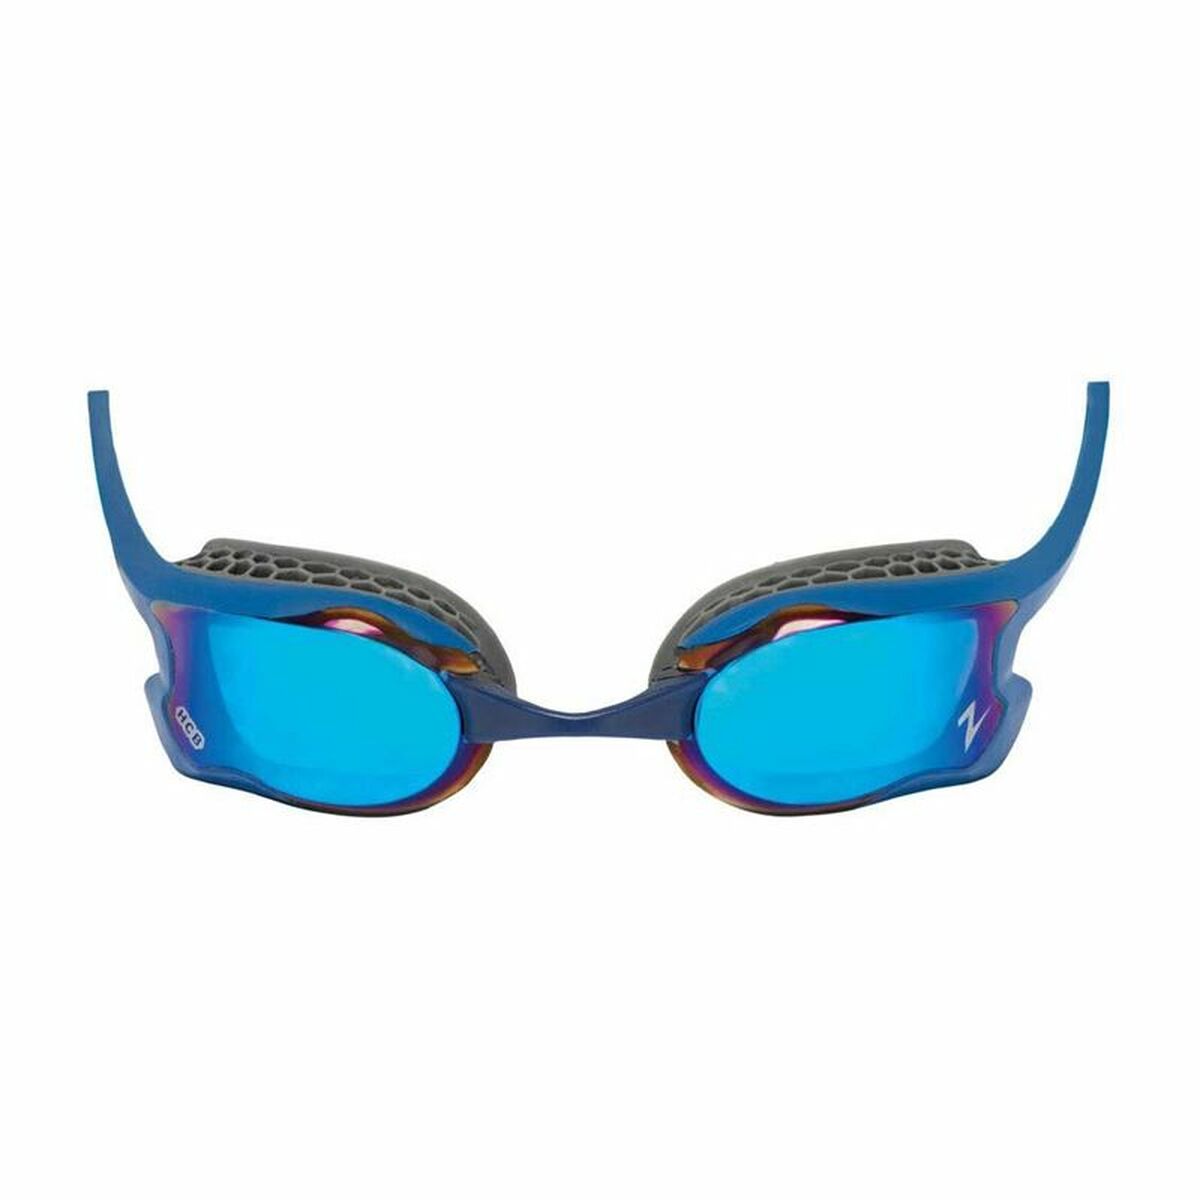 Swimming Goggles Zoggs Raptor Blue One size